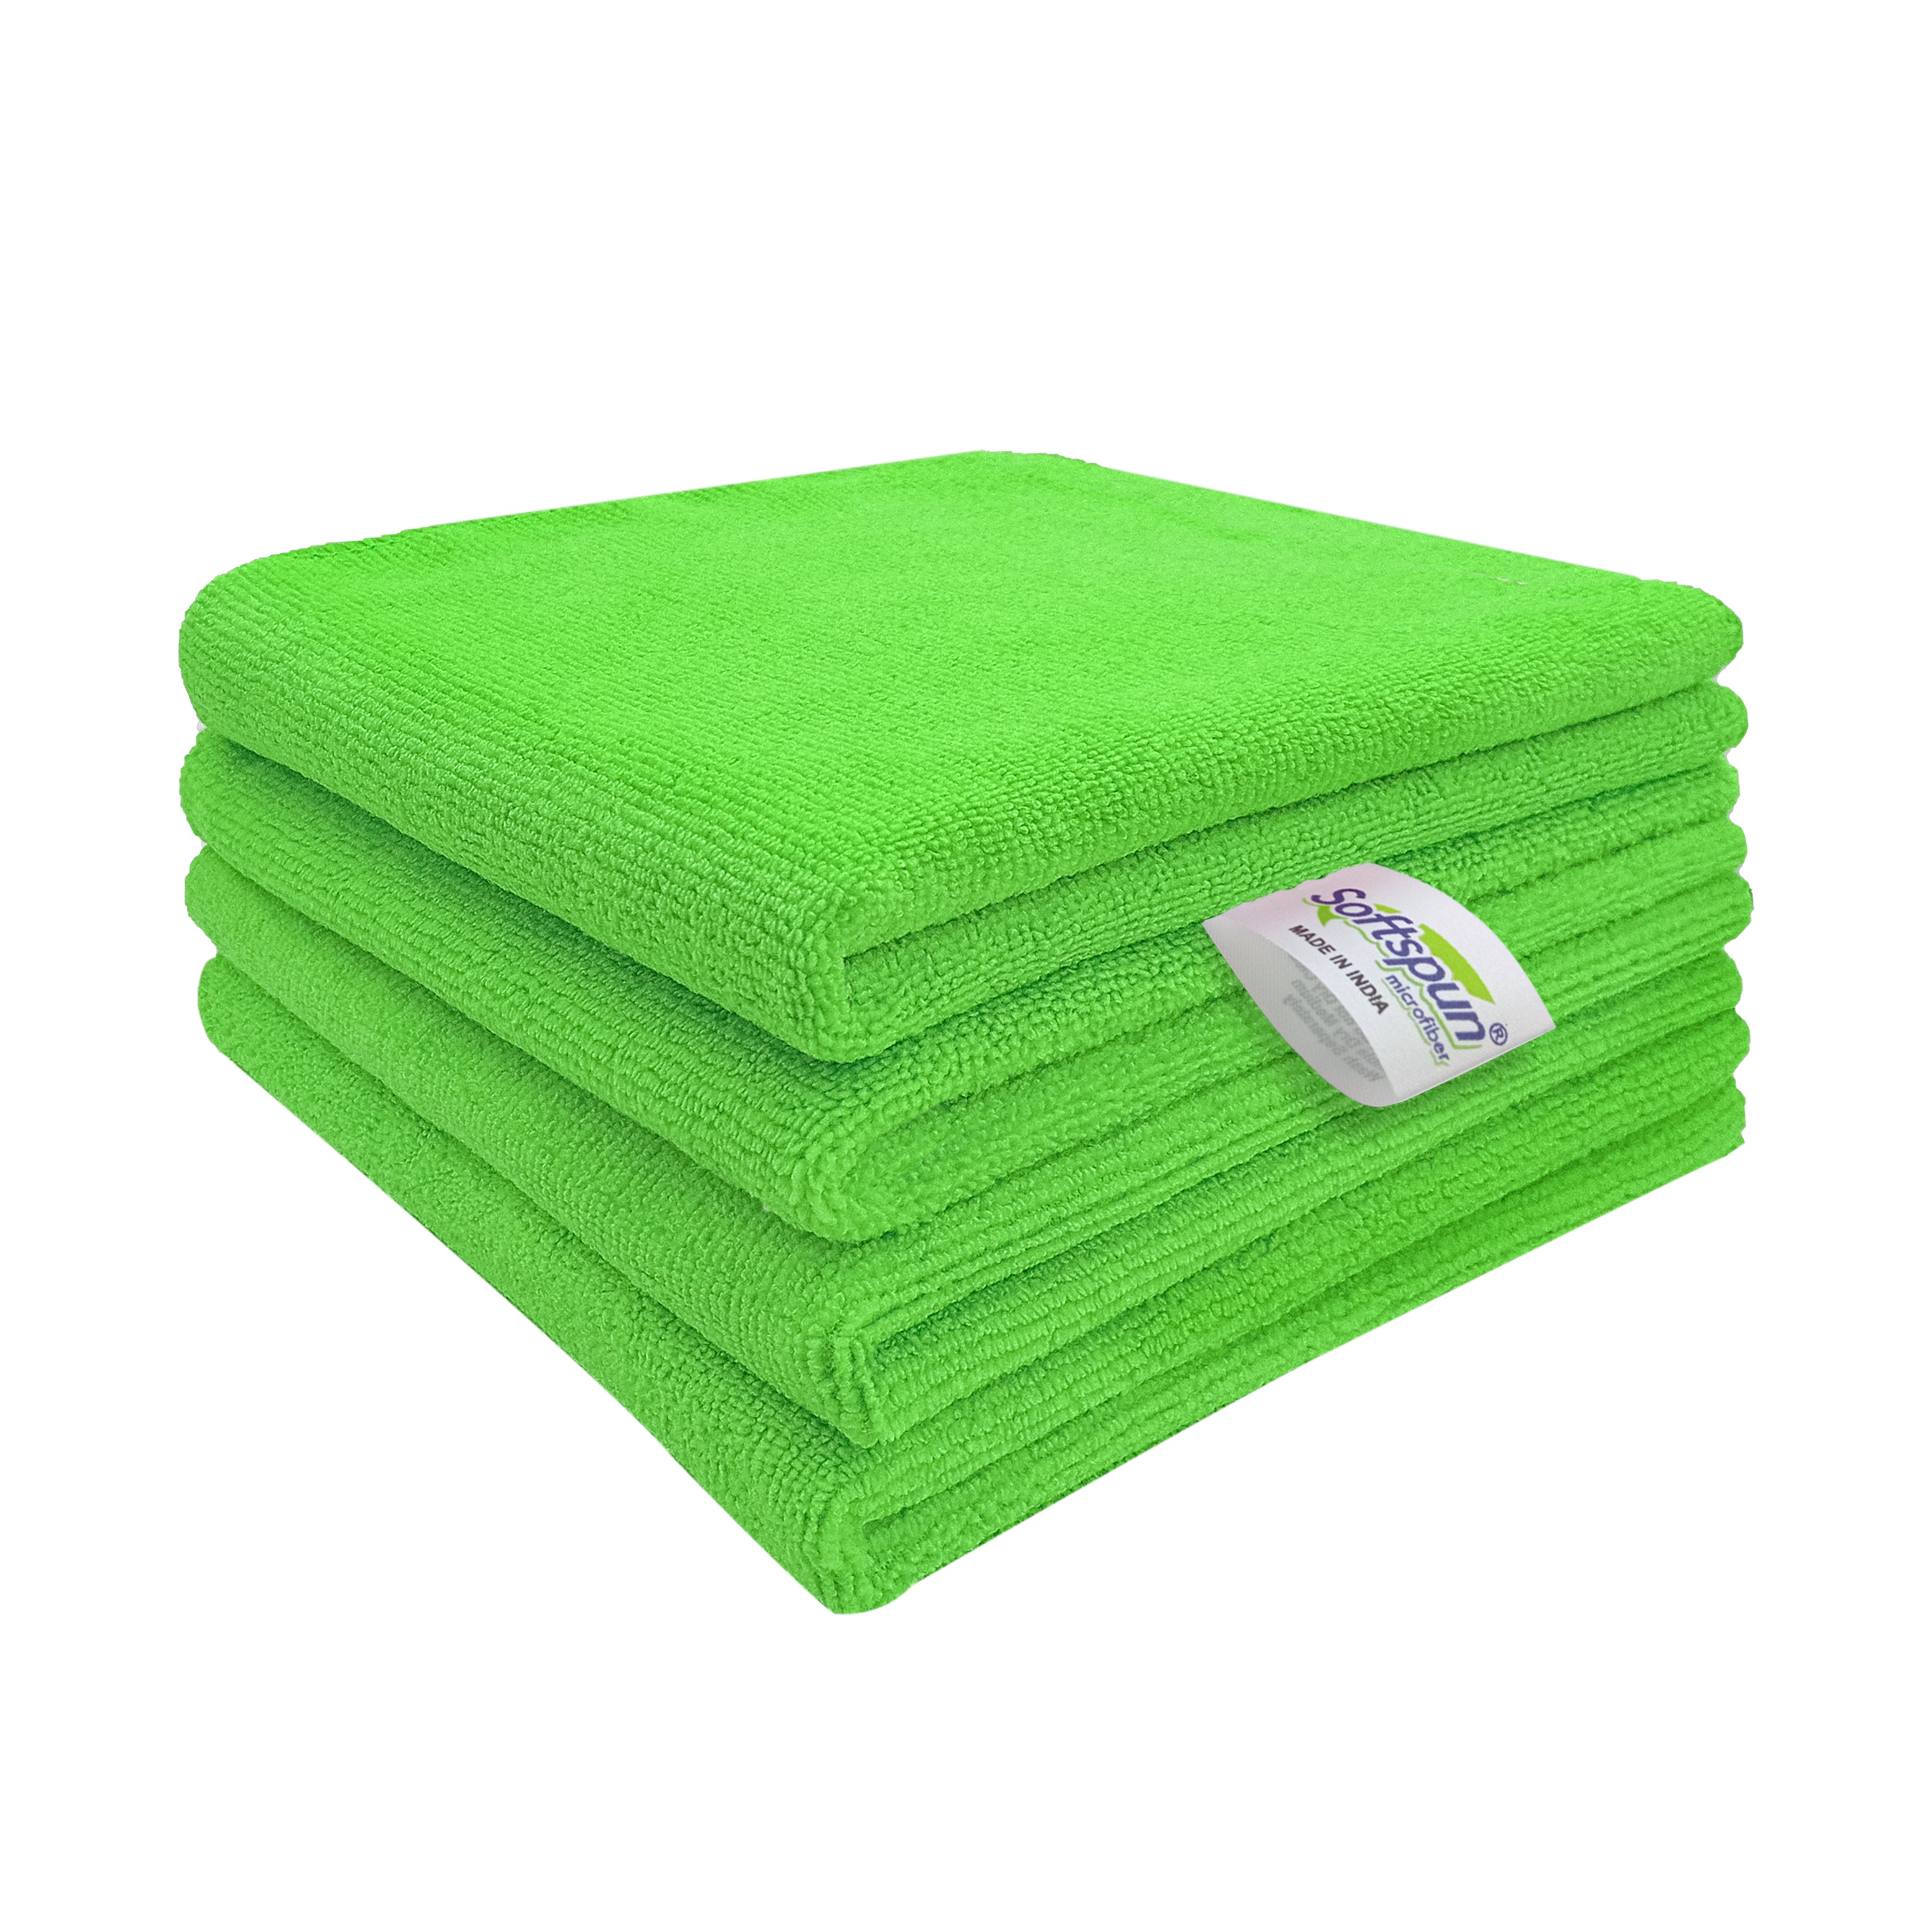 SOFTSPUN Microfiber Home & Kitchen Cleaning and Dusting Cloth 340 GSM, Highly Absorbent, Lint and Streak Free, Multi-Purpose Wash Cloth for Kitchen.